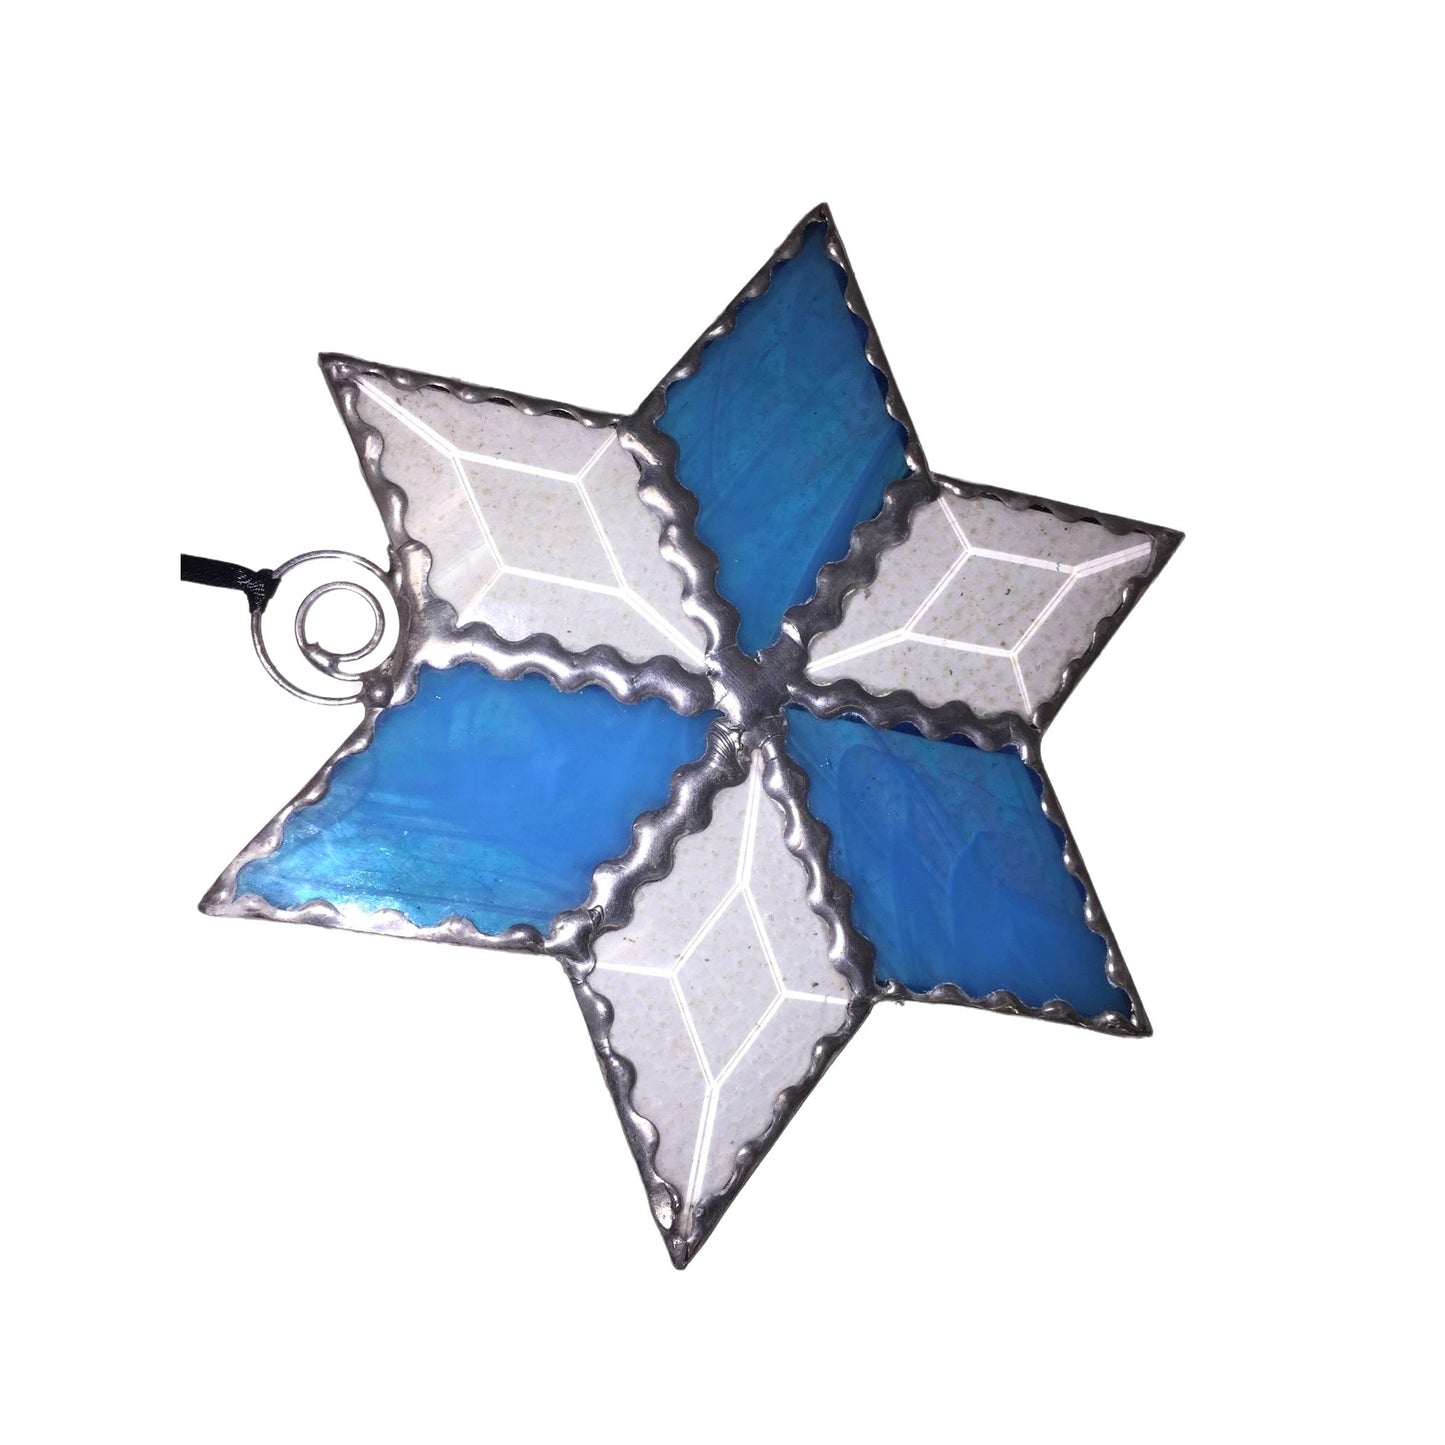 STAINED GLASS Star Shaped Sun Catcher. BLUE & Bevelled WHITE 6" Diameter